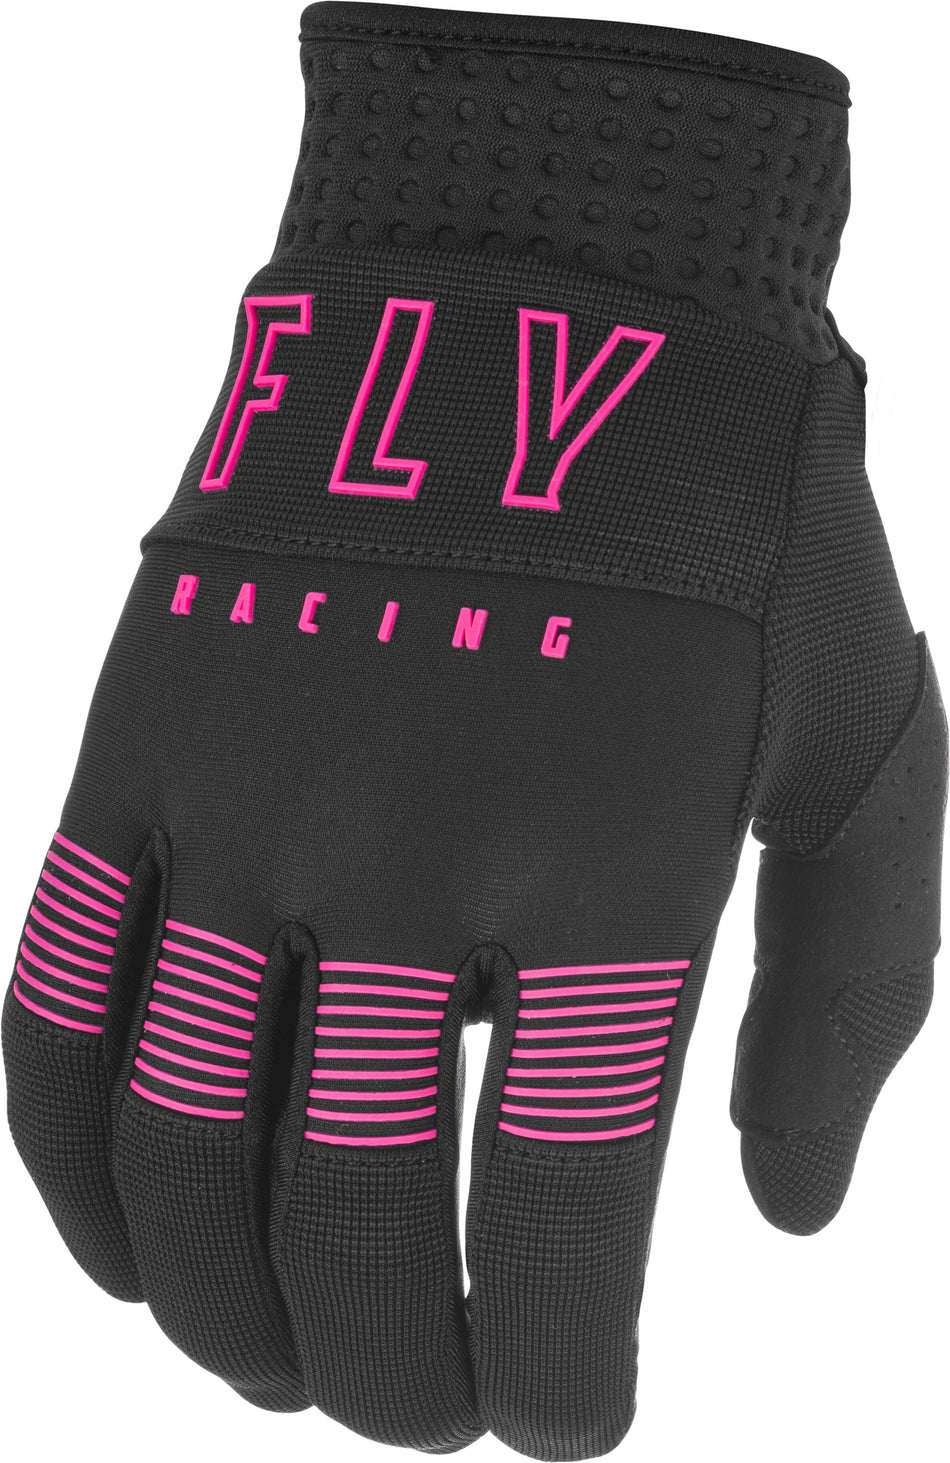 FLY RACING Youth F-16 Gloves Black/Pink Sz 06 374-91806